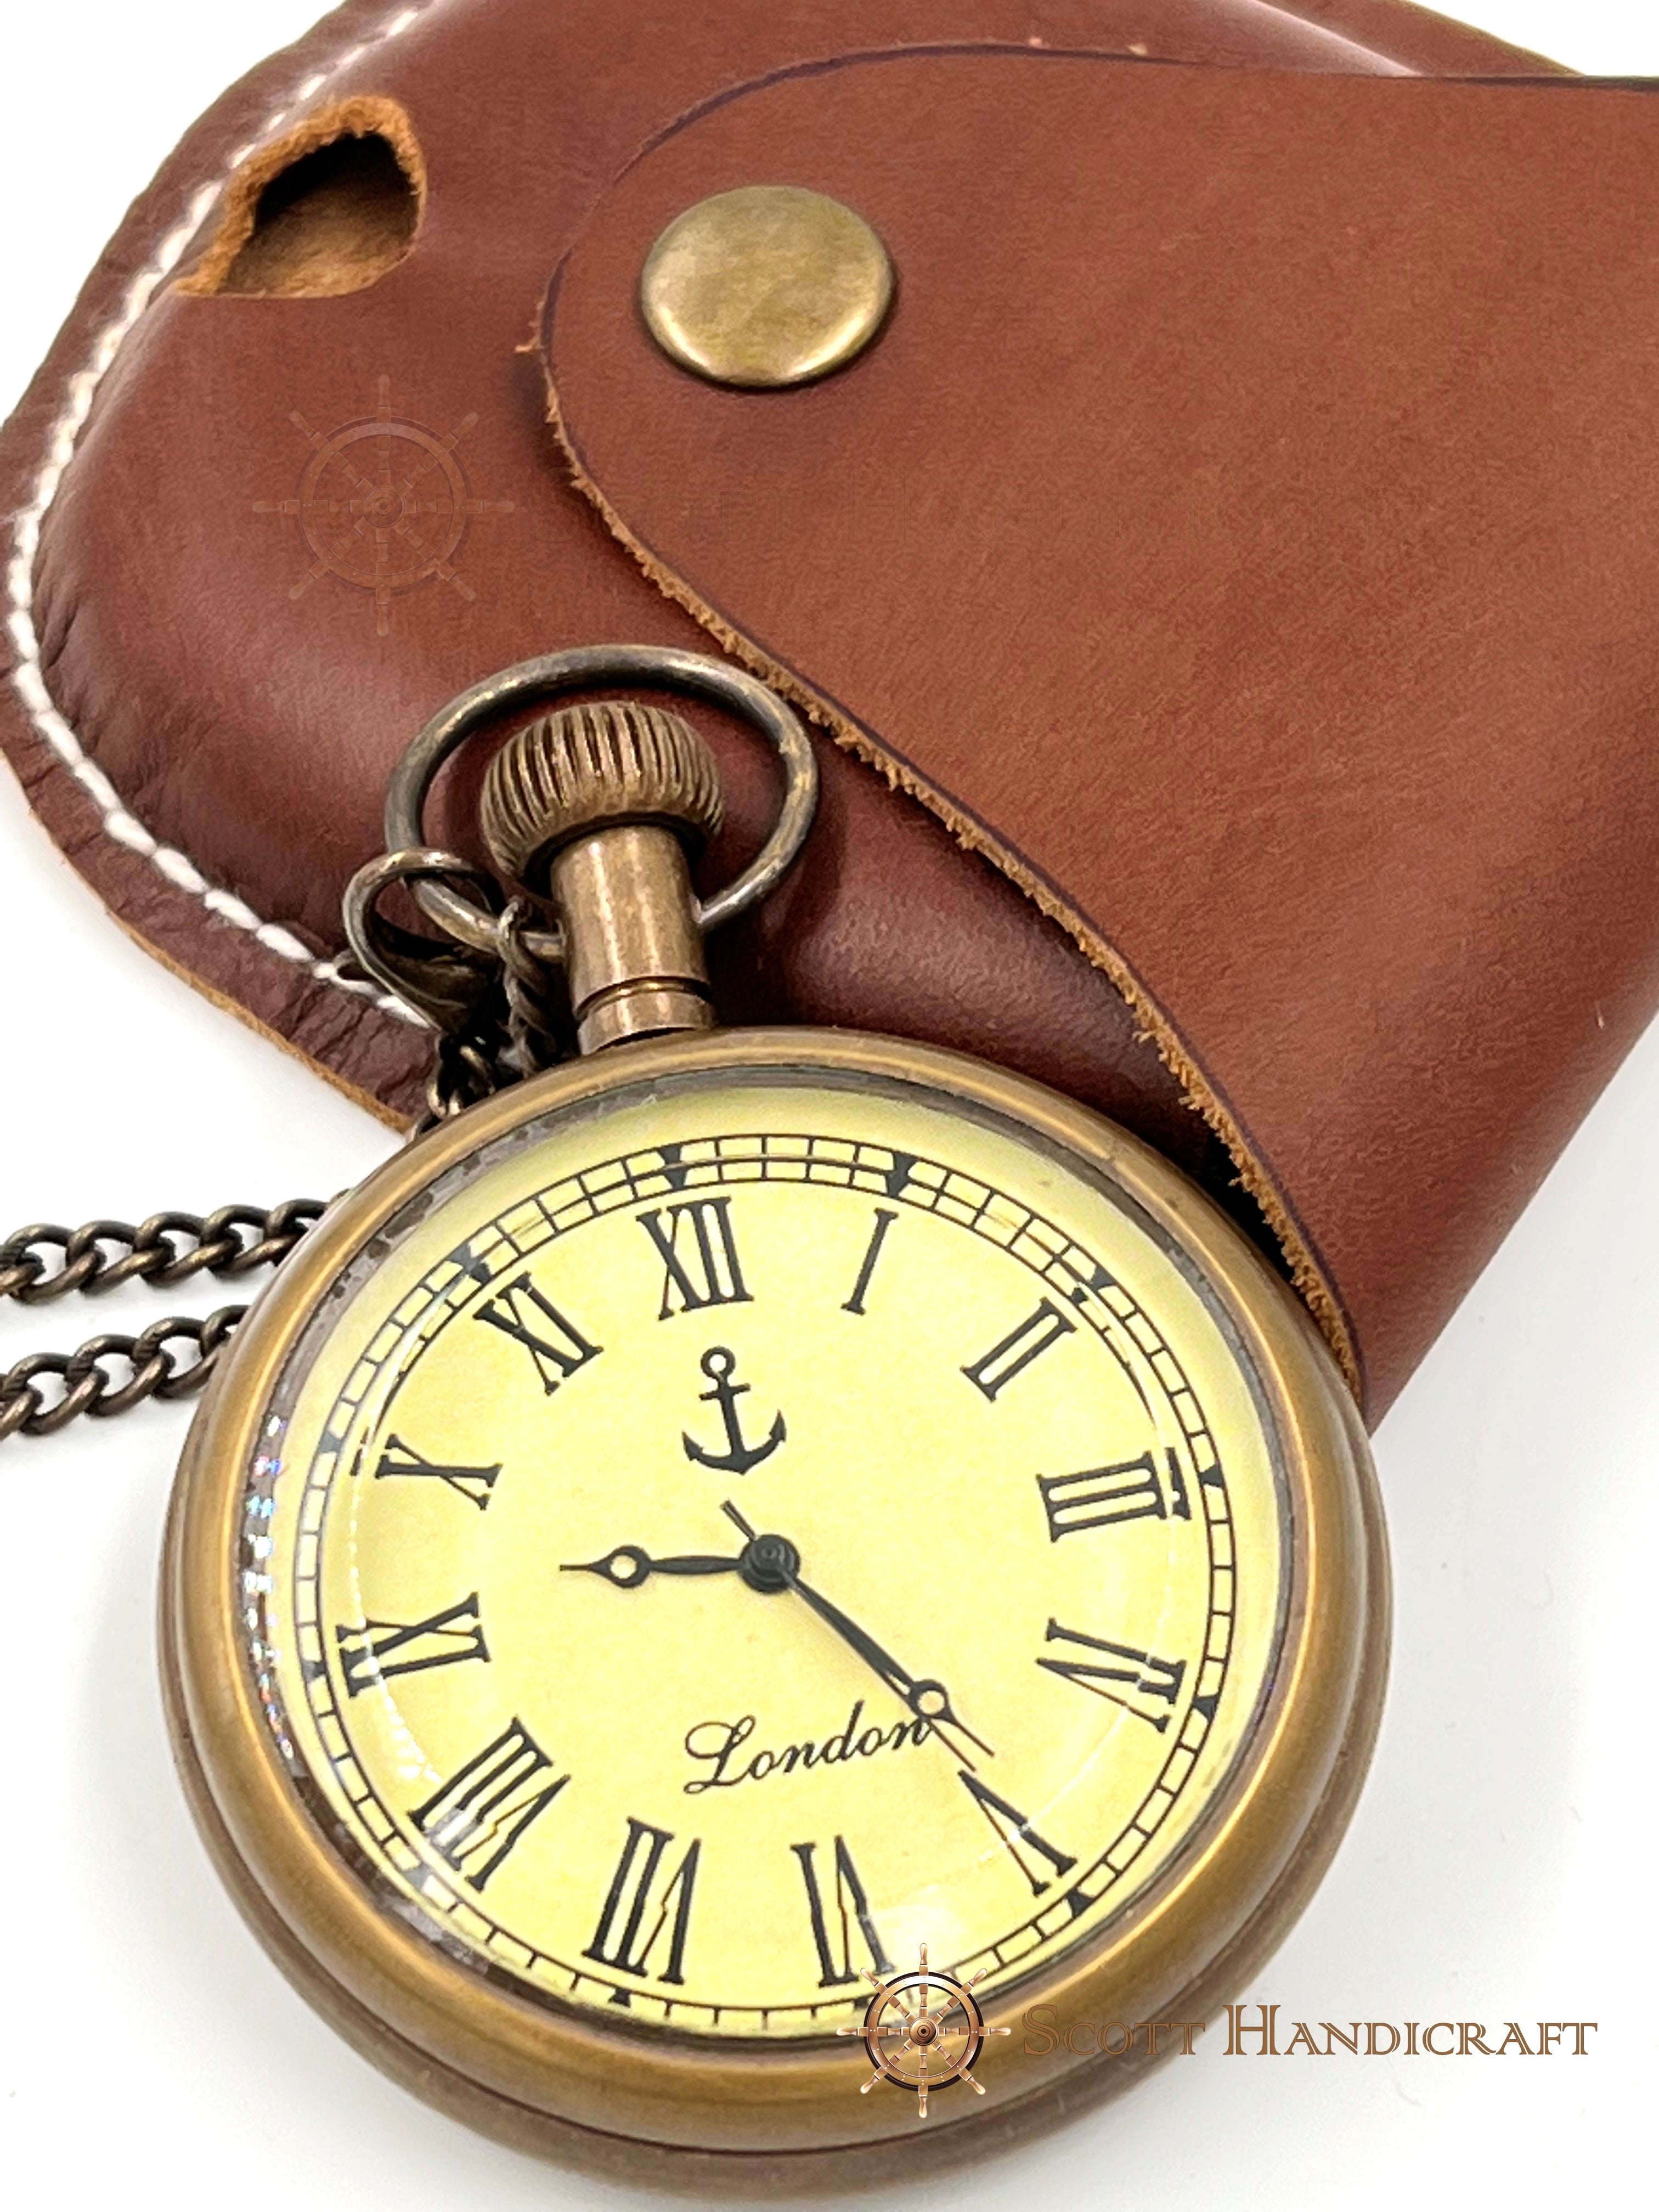 Victoria London Antiqued Brass Pocket Watch with Leather Case - Antique Vintage Style